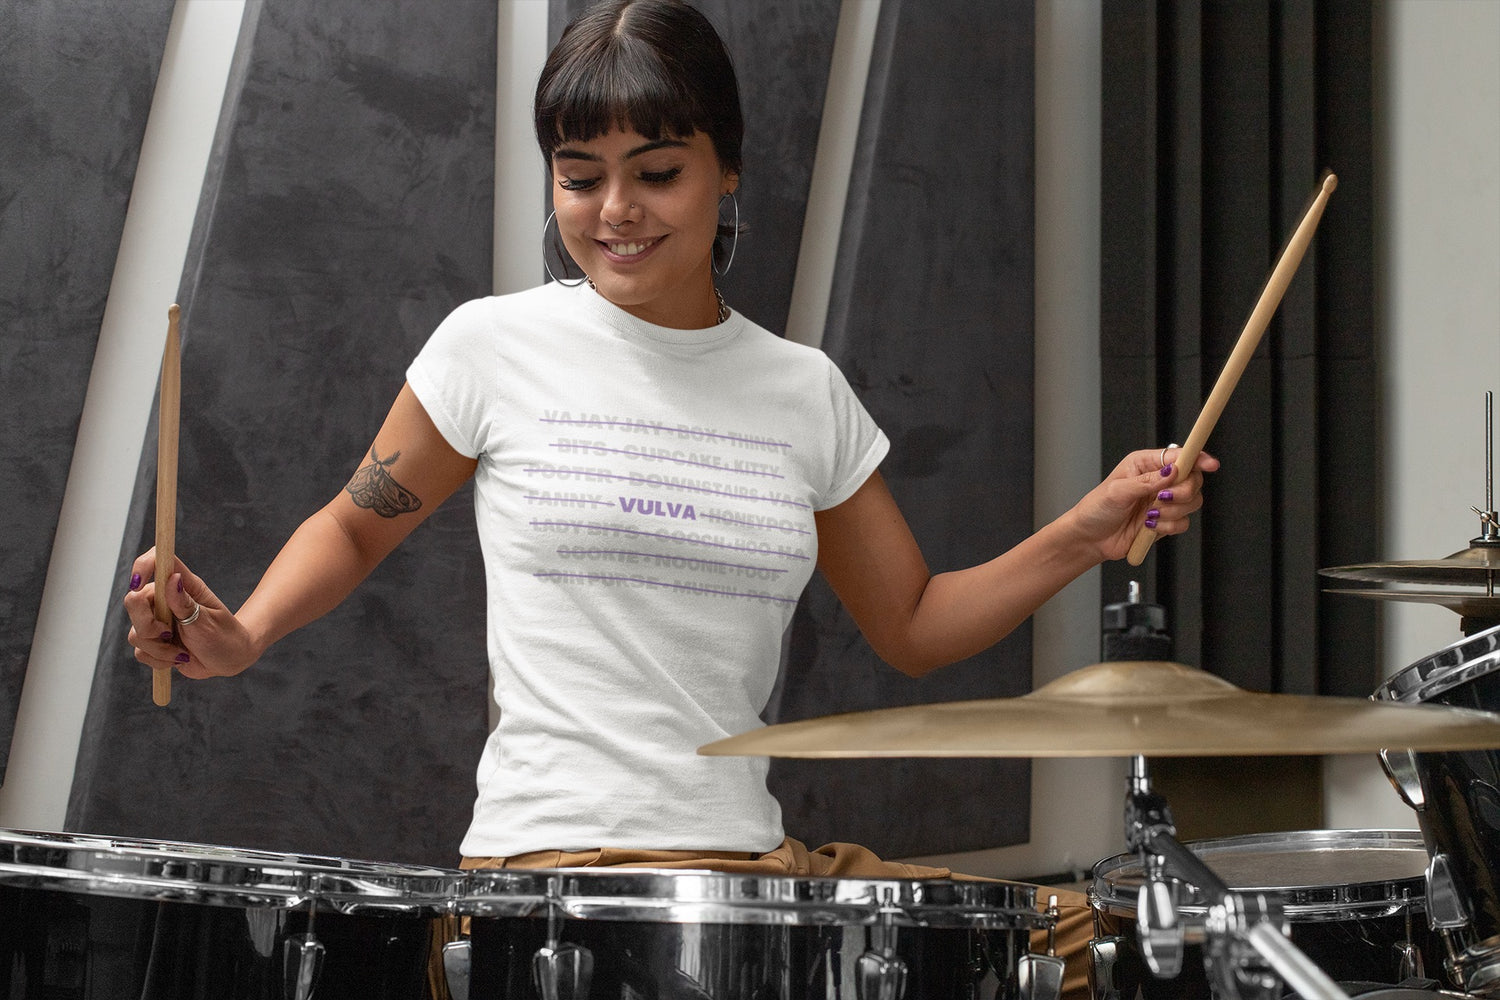 A photo of a person wearing the "Call Me Vulva" t-shirt design while playing the drums with a joyful expression.